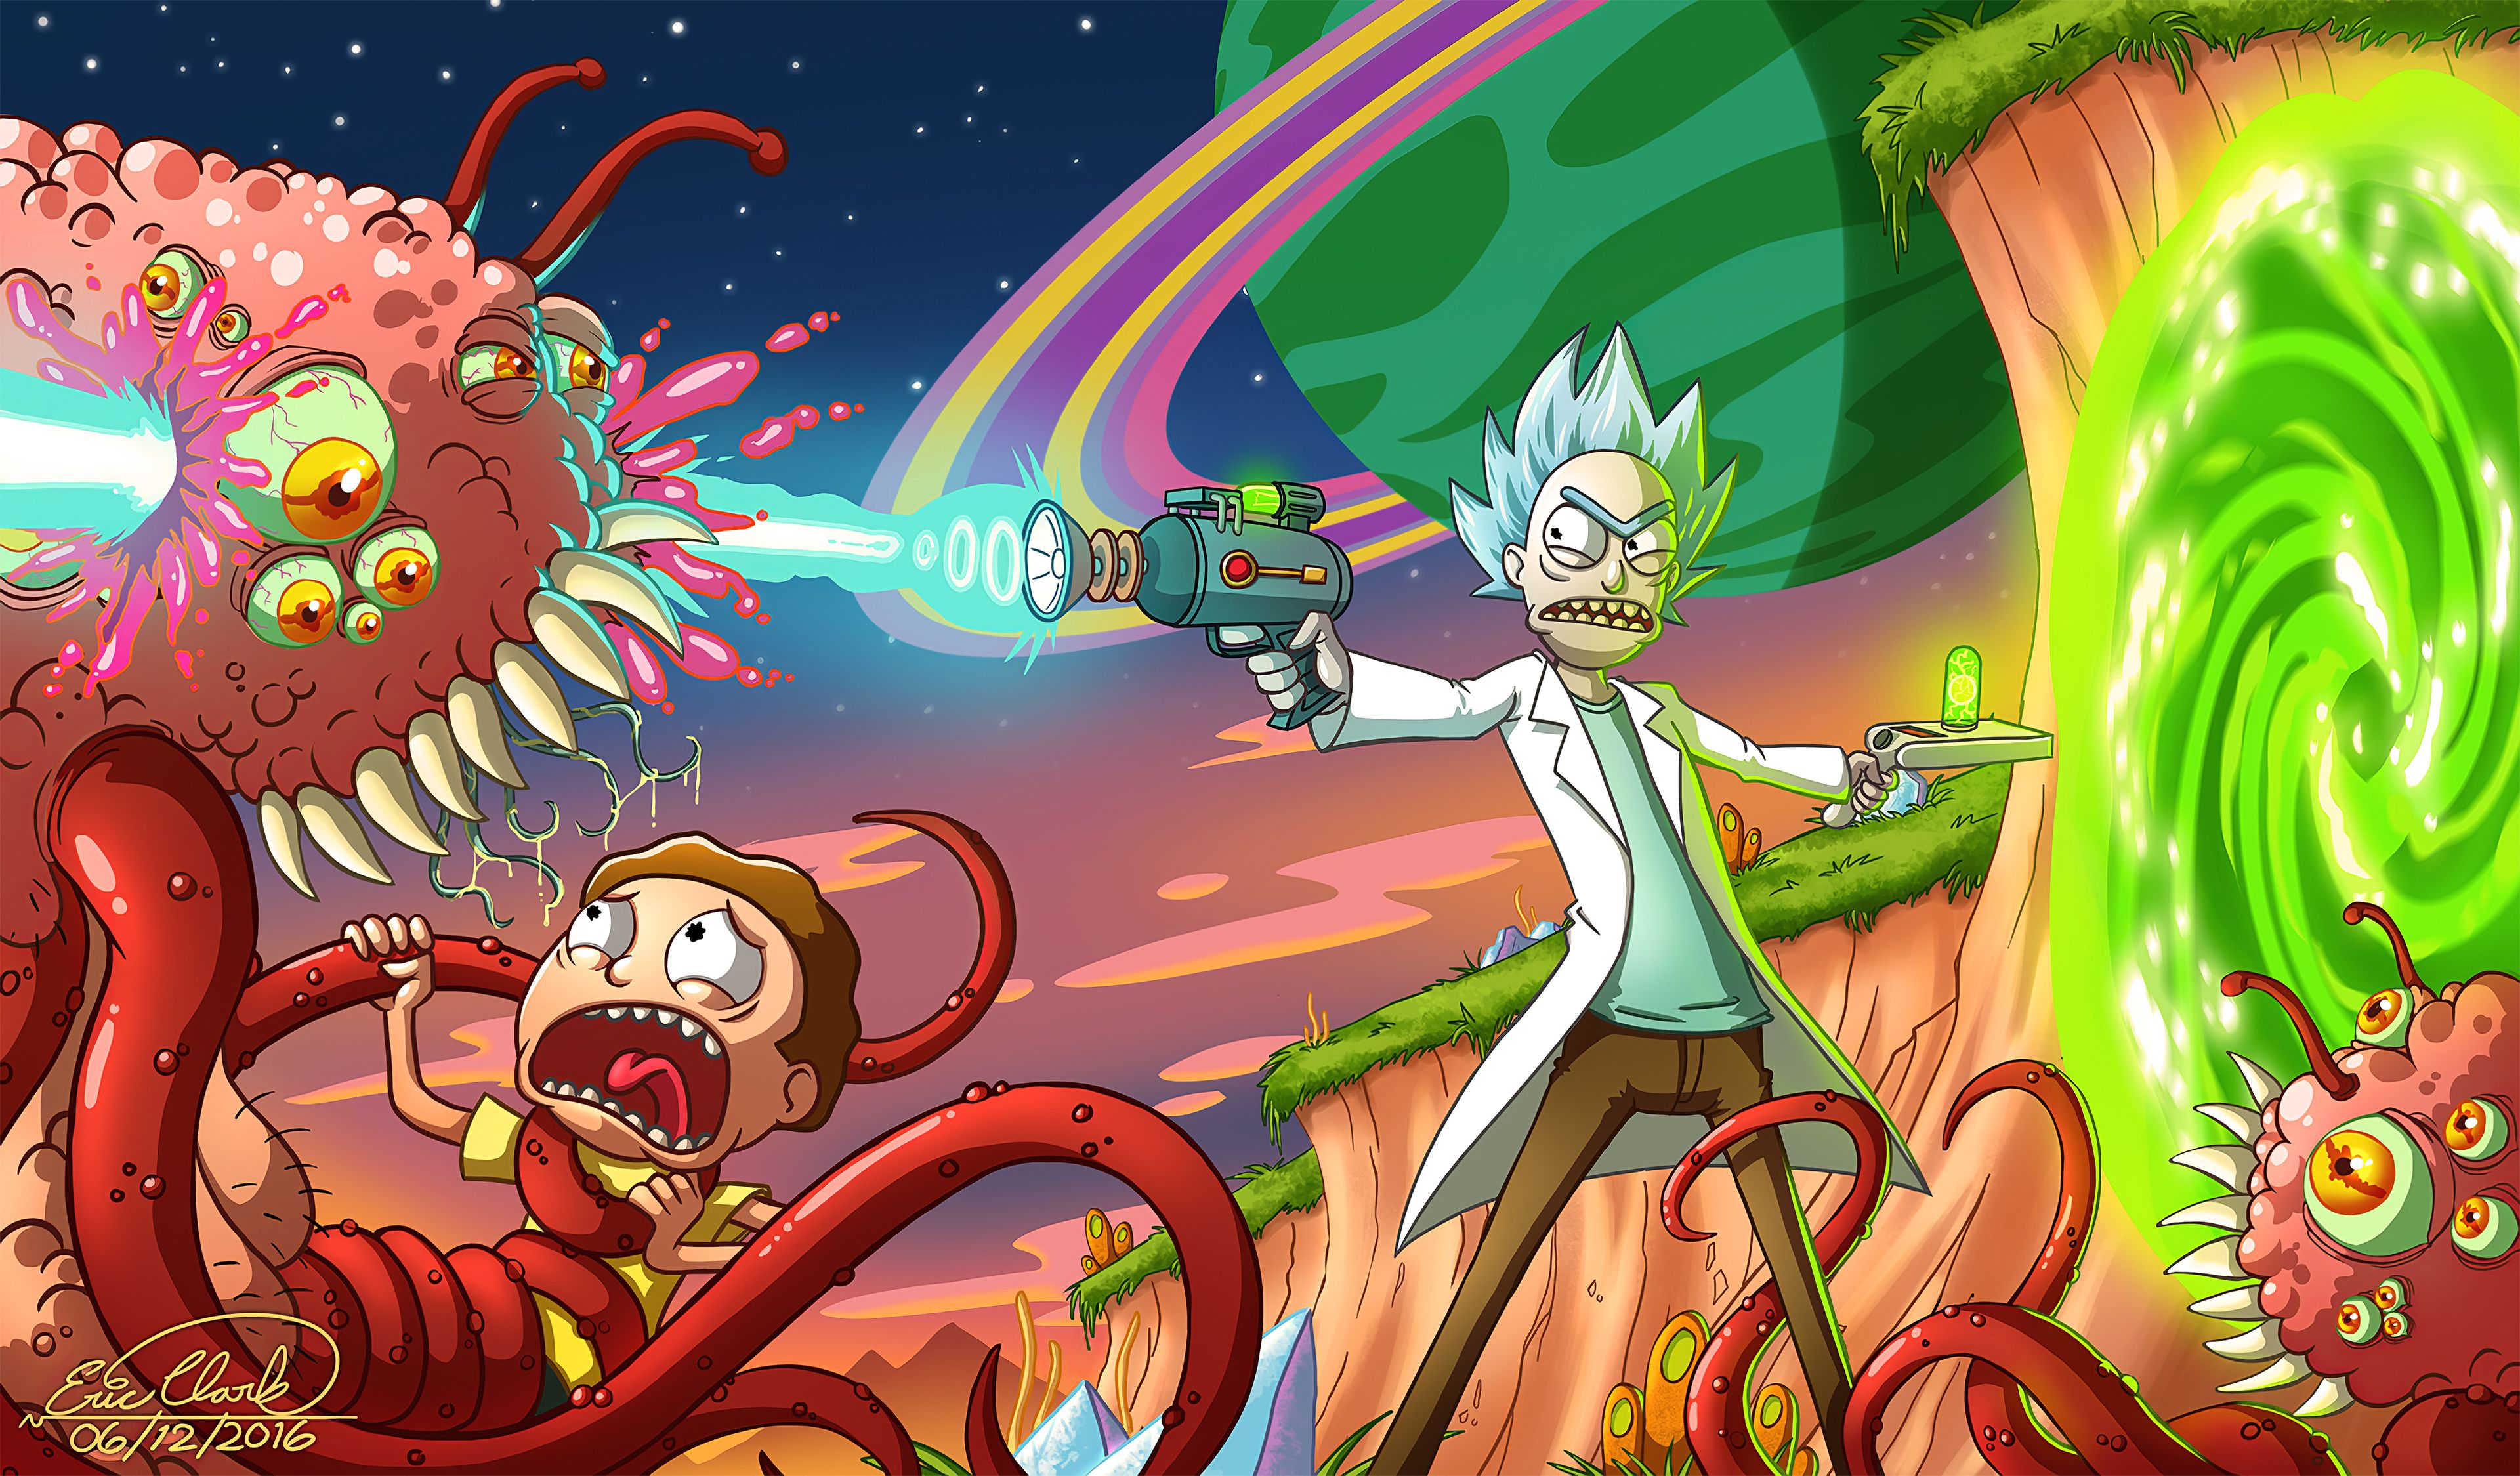 Wallpaper 4k Rick And Morty Smith Adventures Rick And Morty 4k wallpaper, Rick And Morty art wallpaper 4k, Rick And Morty wallpaper